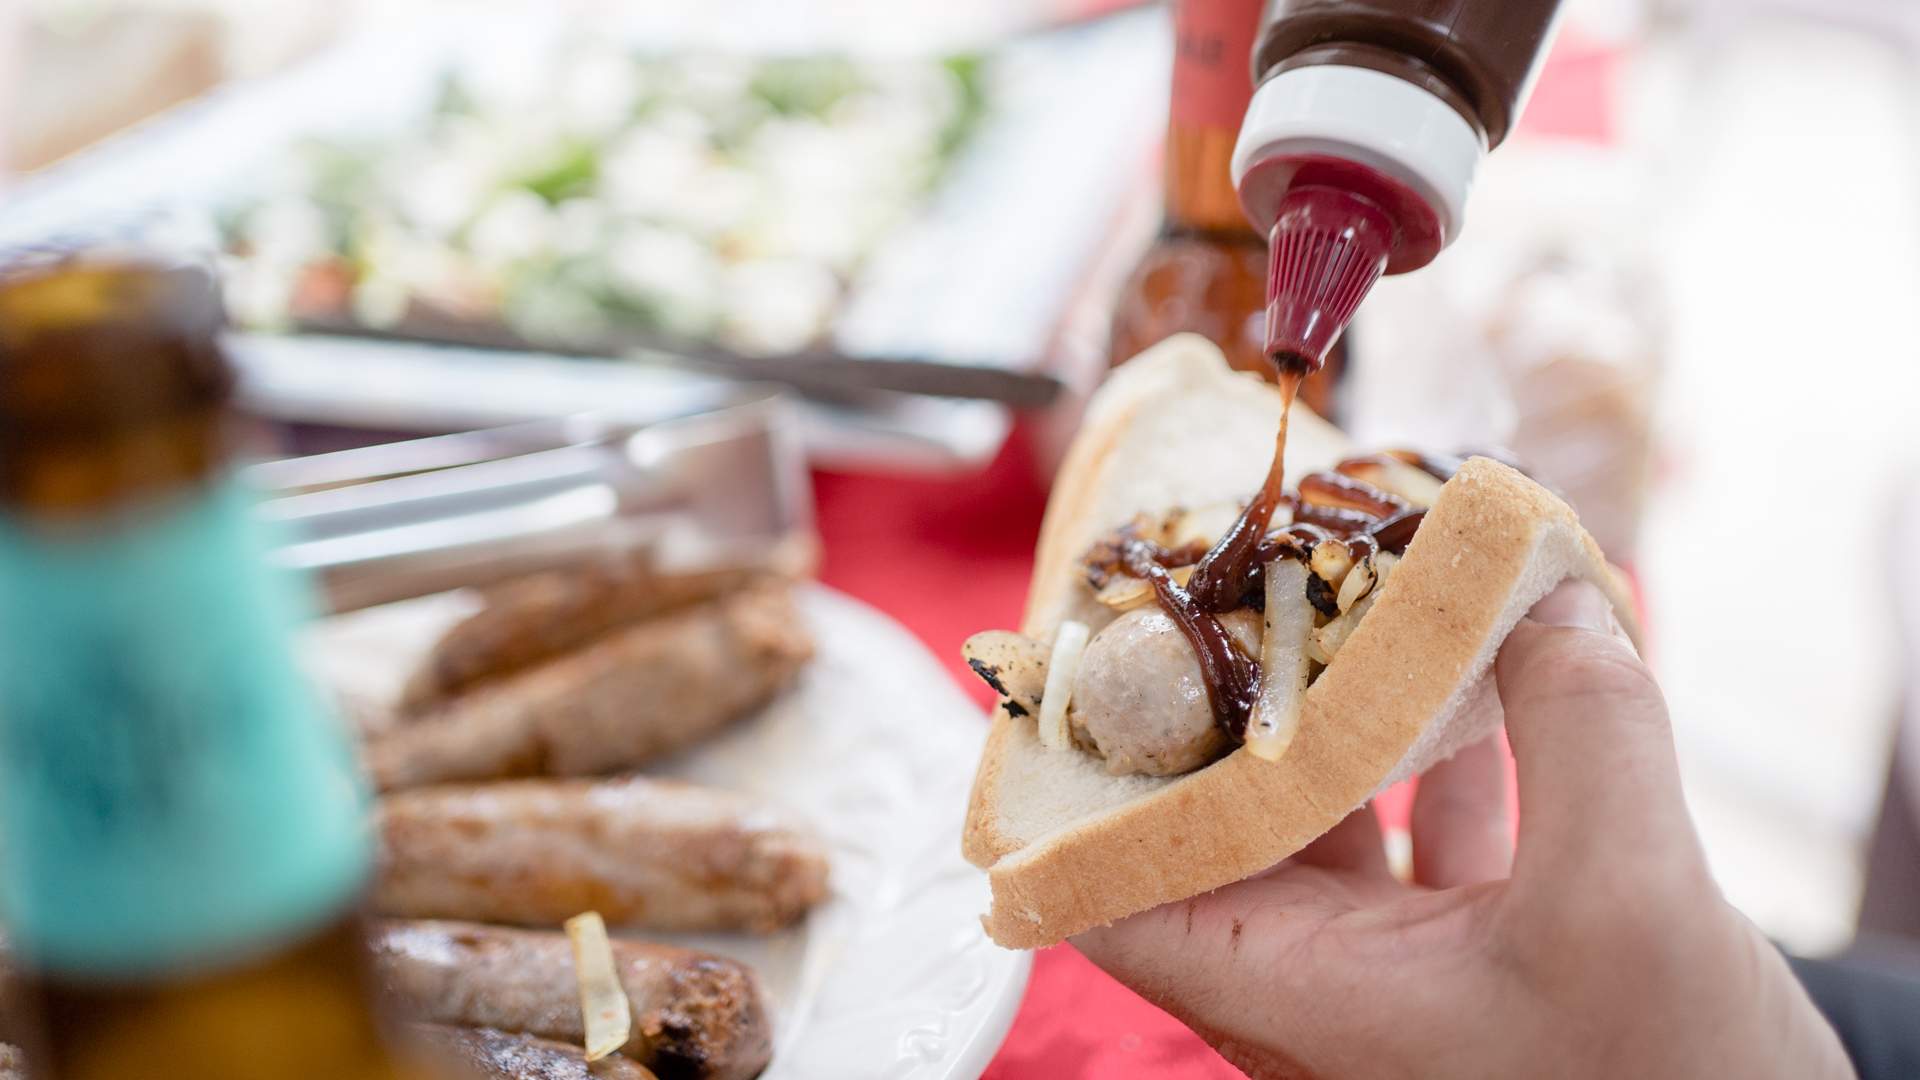 We've Figured Out Your Perfect Sausage Based on Your Hottest 100 Pick — and It's All for a Good Cause